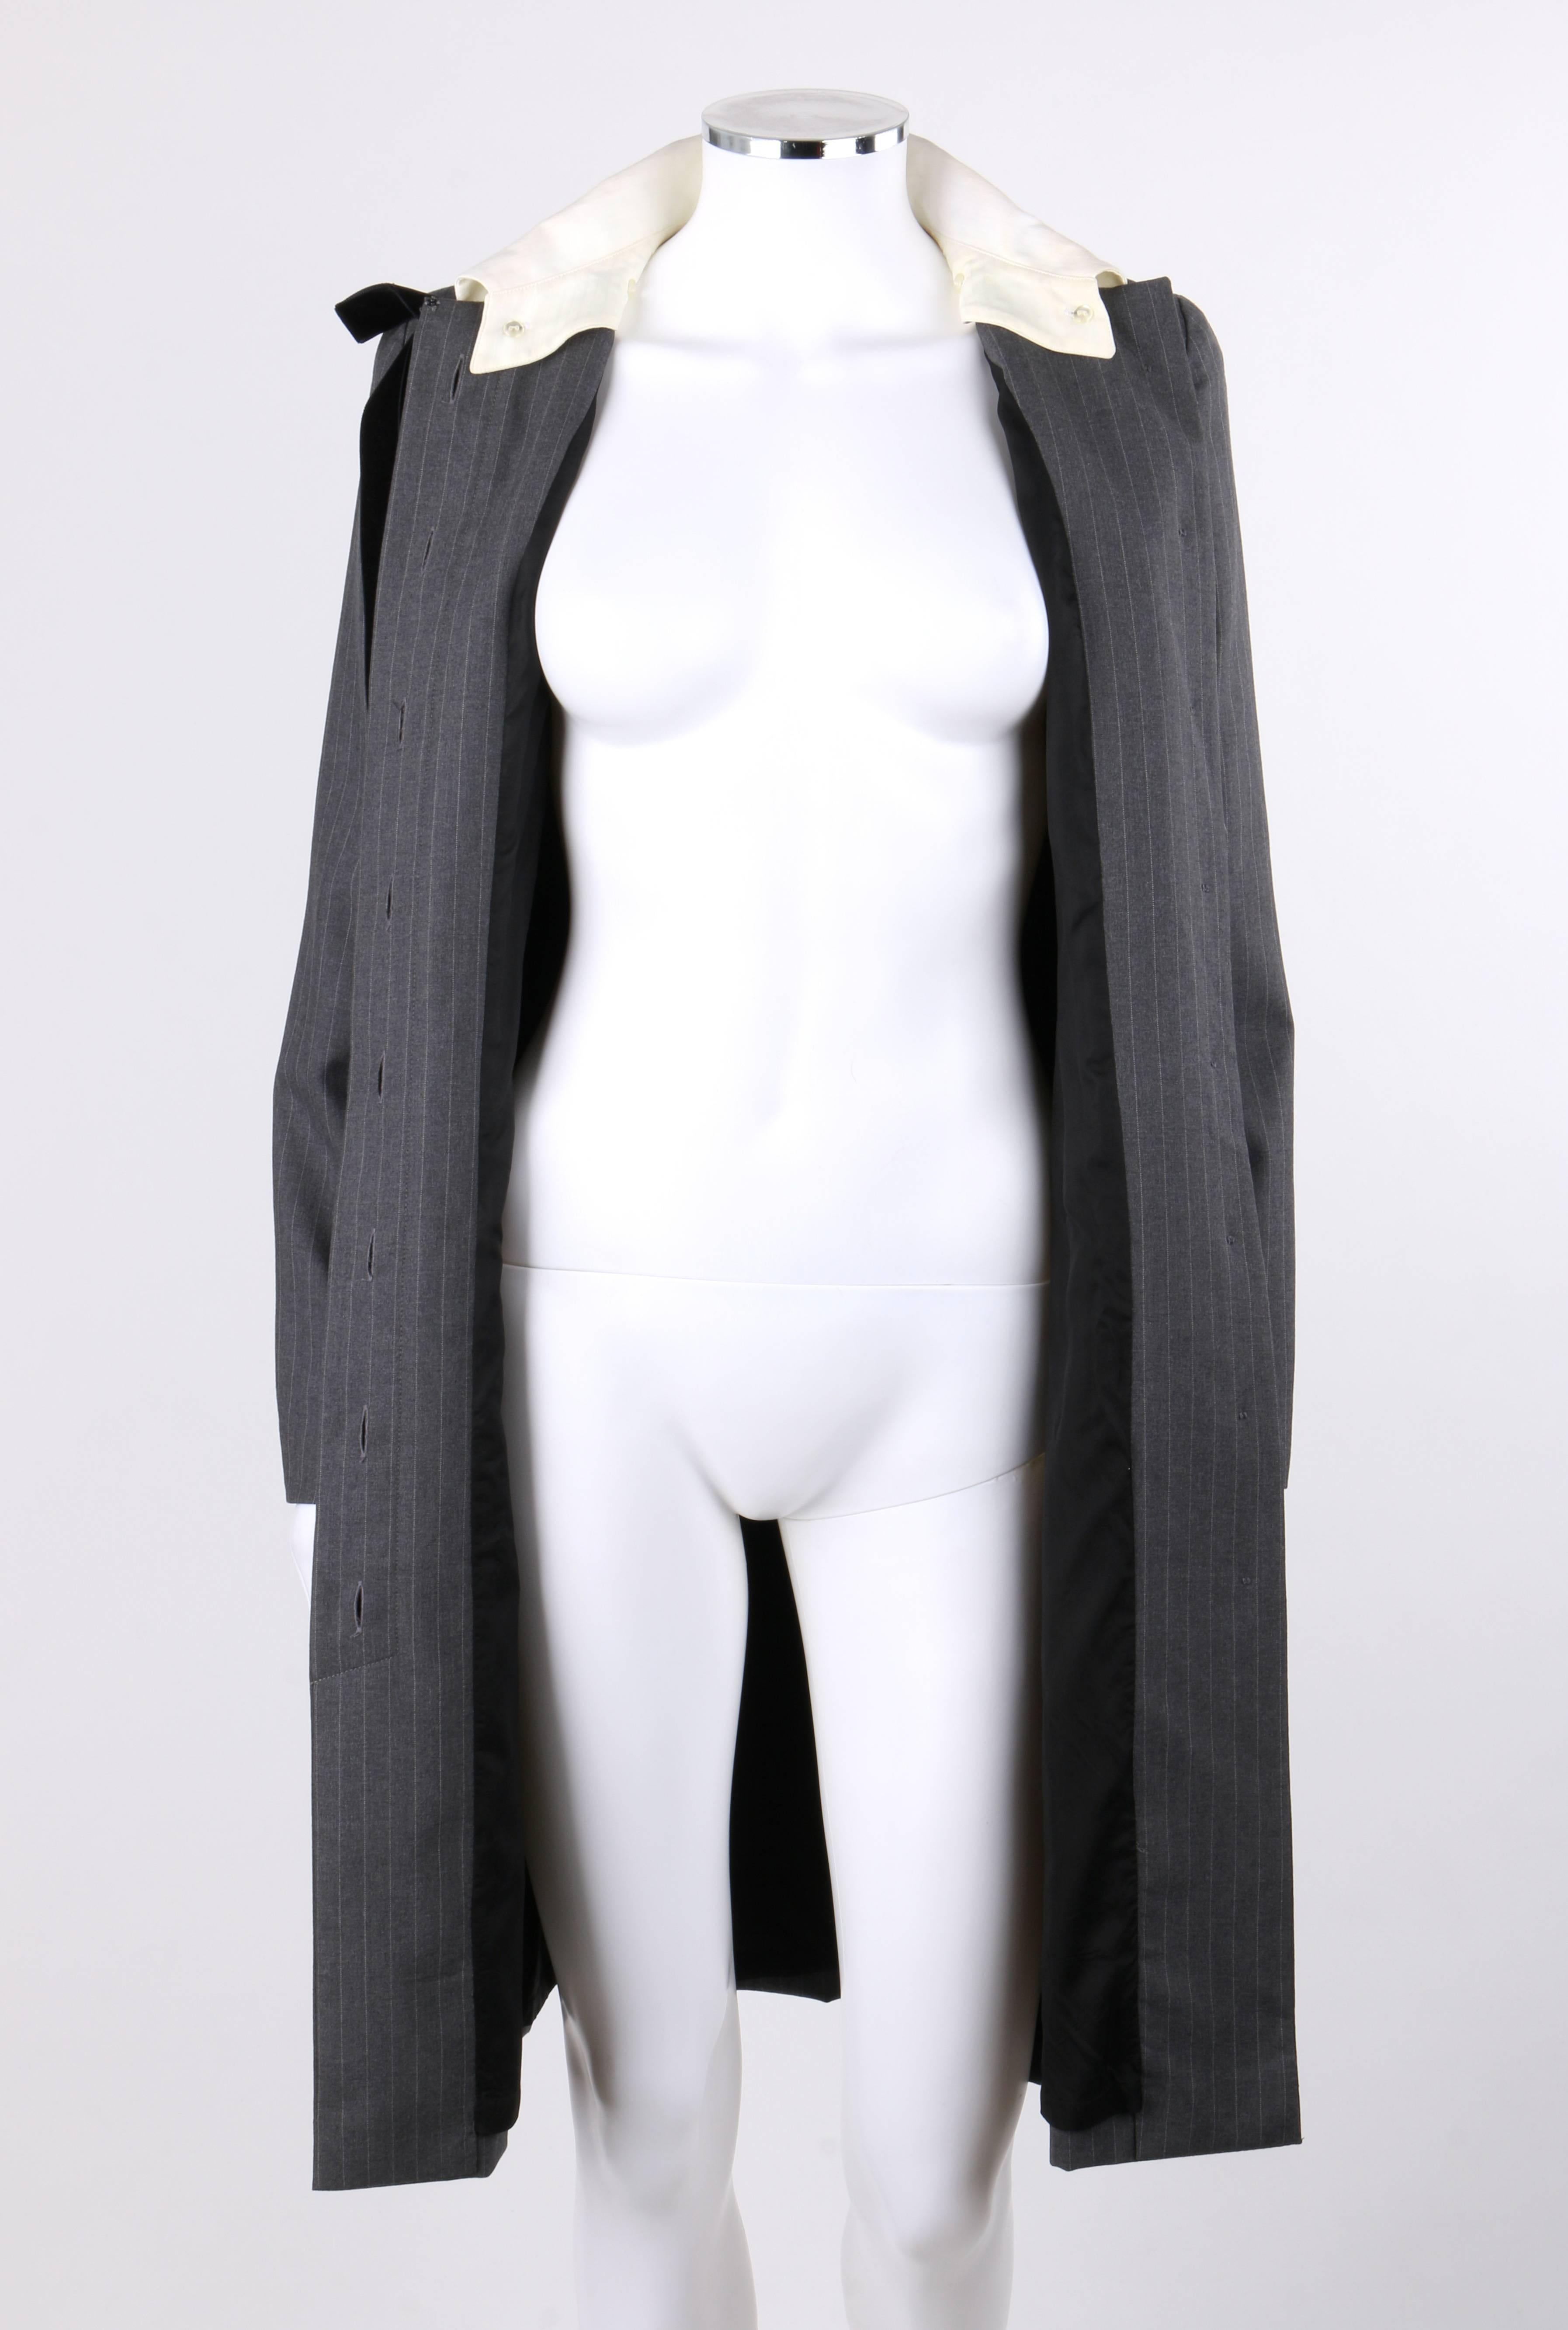 GIVENCHY Couture A/W 1996 JOHN GALLIANO Charcoal Gray Wool Bow Shirt Coat Dress In Excellent Condition In Thiensville, WI